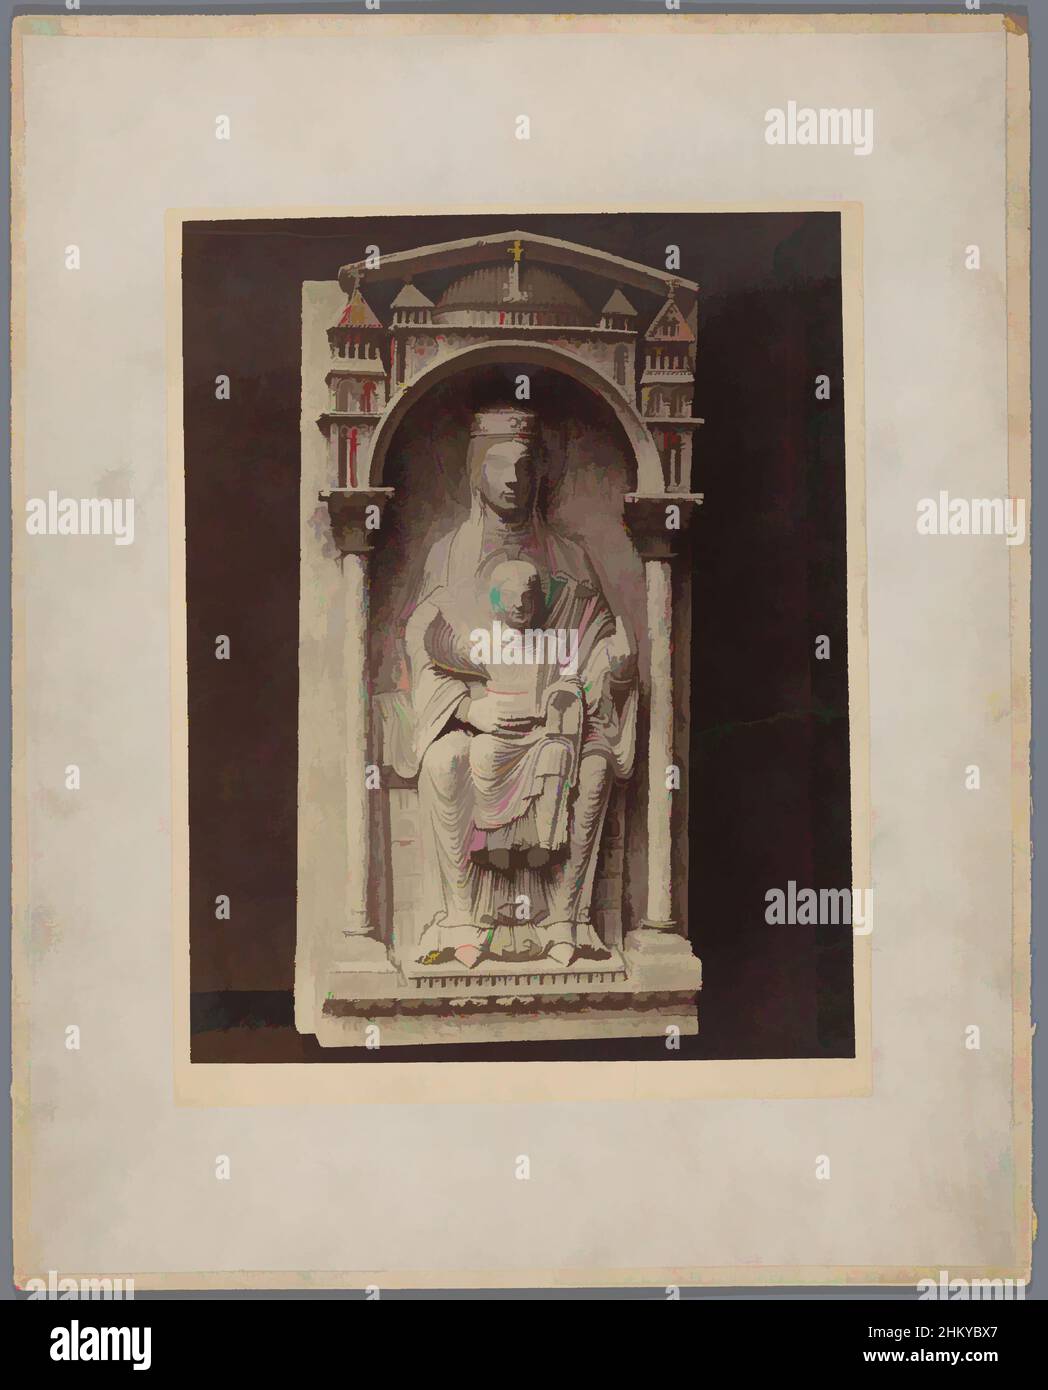 Art inspired by Image of Mary with child, Vierge et enfant, Art Roman, Adolphe Giraudon, 1850 - 1900, photographic support, cardboard, albumen print, height 369 mm × width 296 mm, Classic works modernized by Artotop with a splash of modernity. Shapes, color and value, eye-catching visual impact on art. Emotions through freedom of artworks in a contemporary way. A timeless message pursuing a wildly creative new direction. Artists turning to the digital medium and creating the Artotop NFT Stock Photo